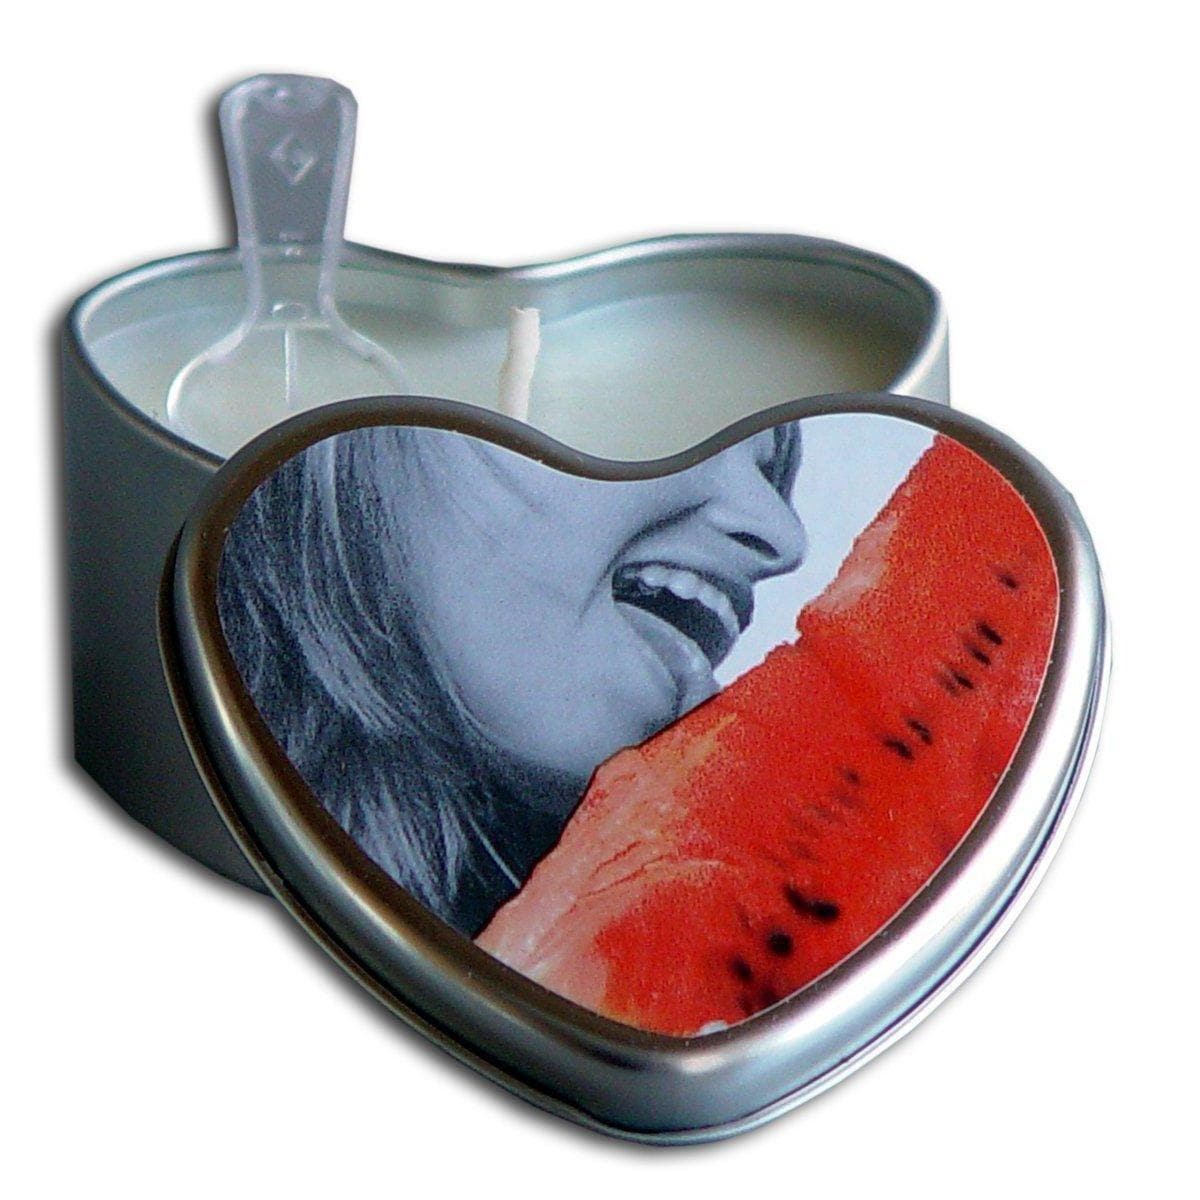 Earthly Body Heart-Shaped Hemp Seed Edible Massage Candle Watermelon 4 Oz - Romantic Blessings